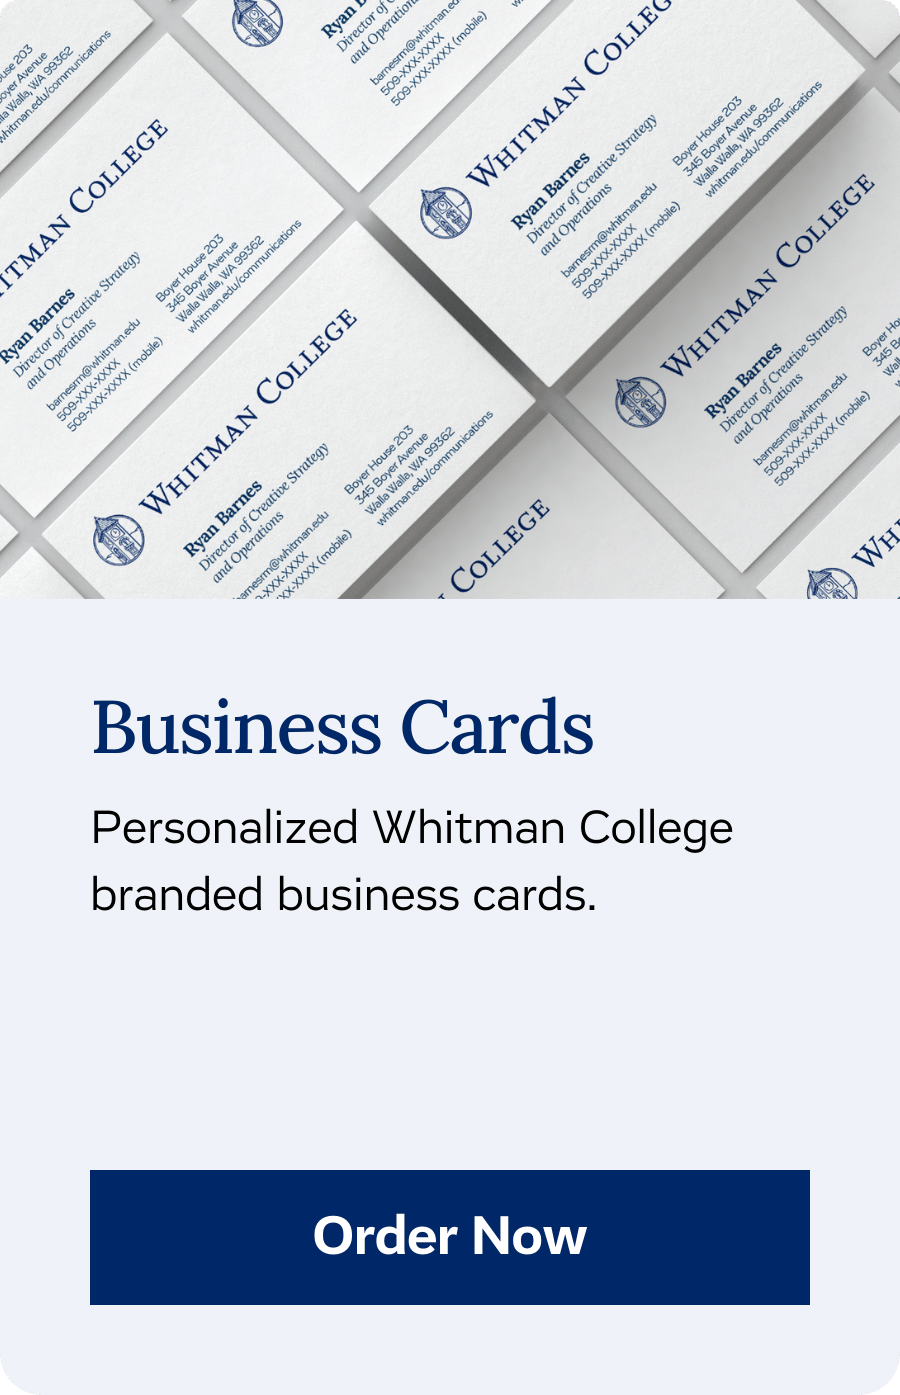 Business Cards; Personalized University branded business cards. Order now.